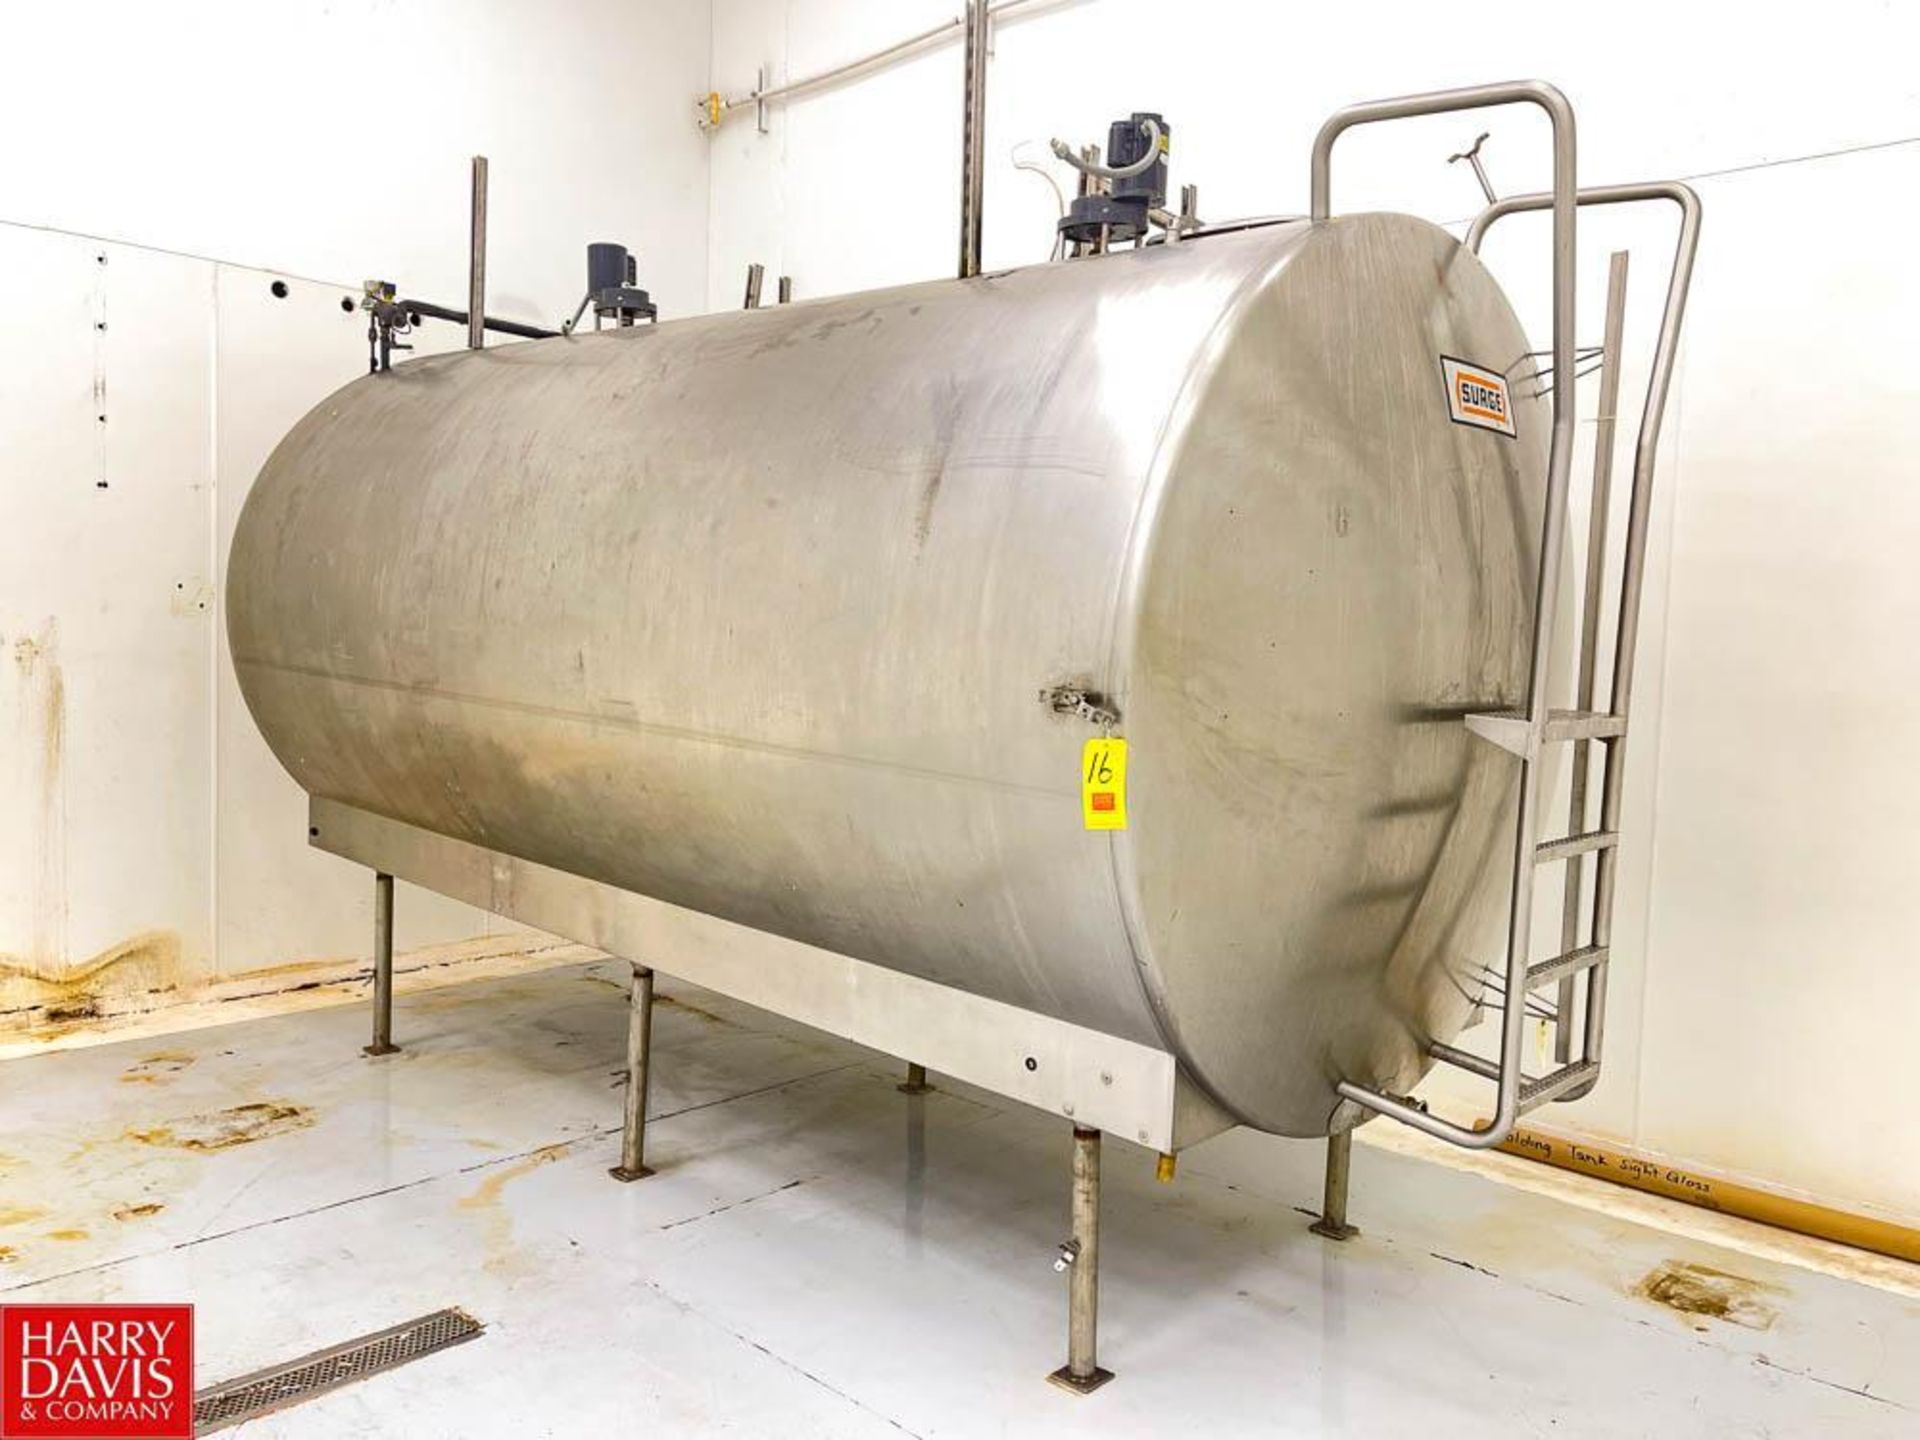 3,000 Gallon All S/S Jacketed Tank, Model: 87130, S/N: 960208 with Dual Vertical Agitator and Space